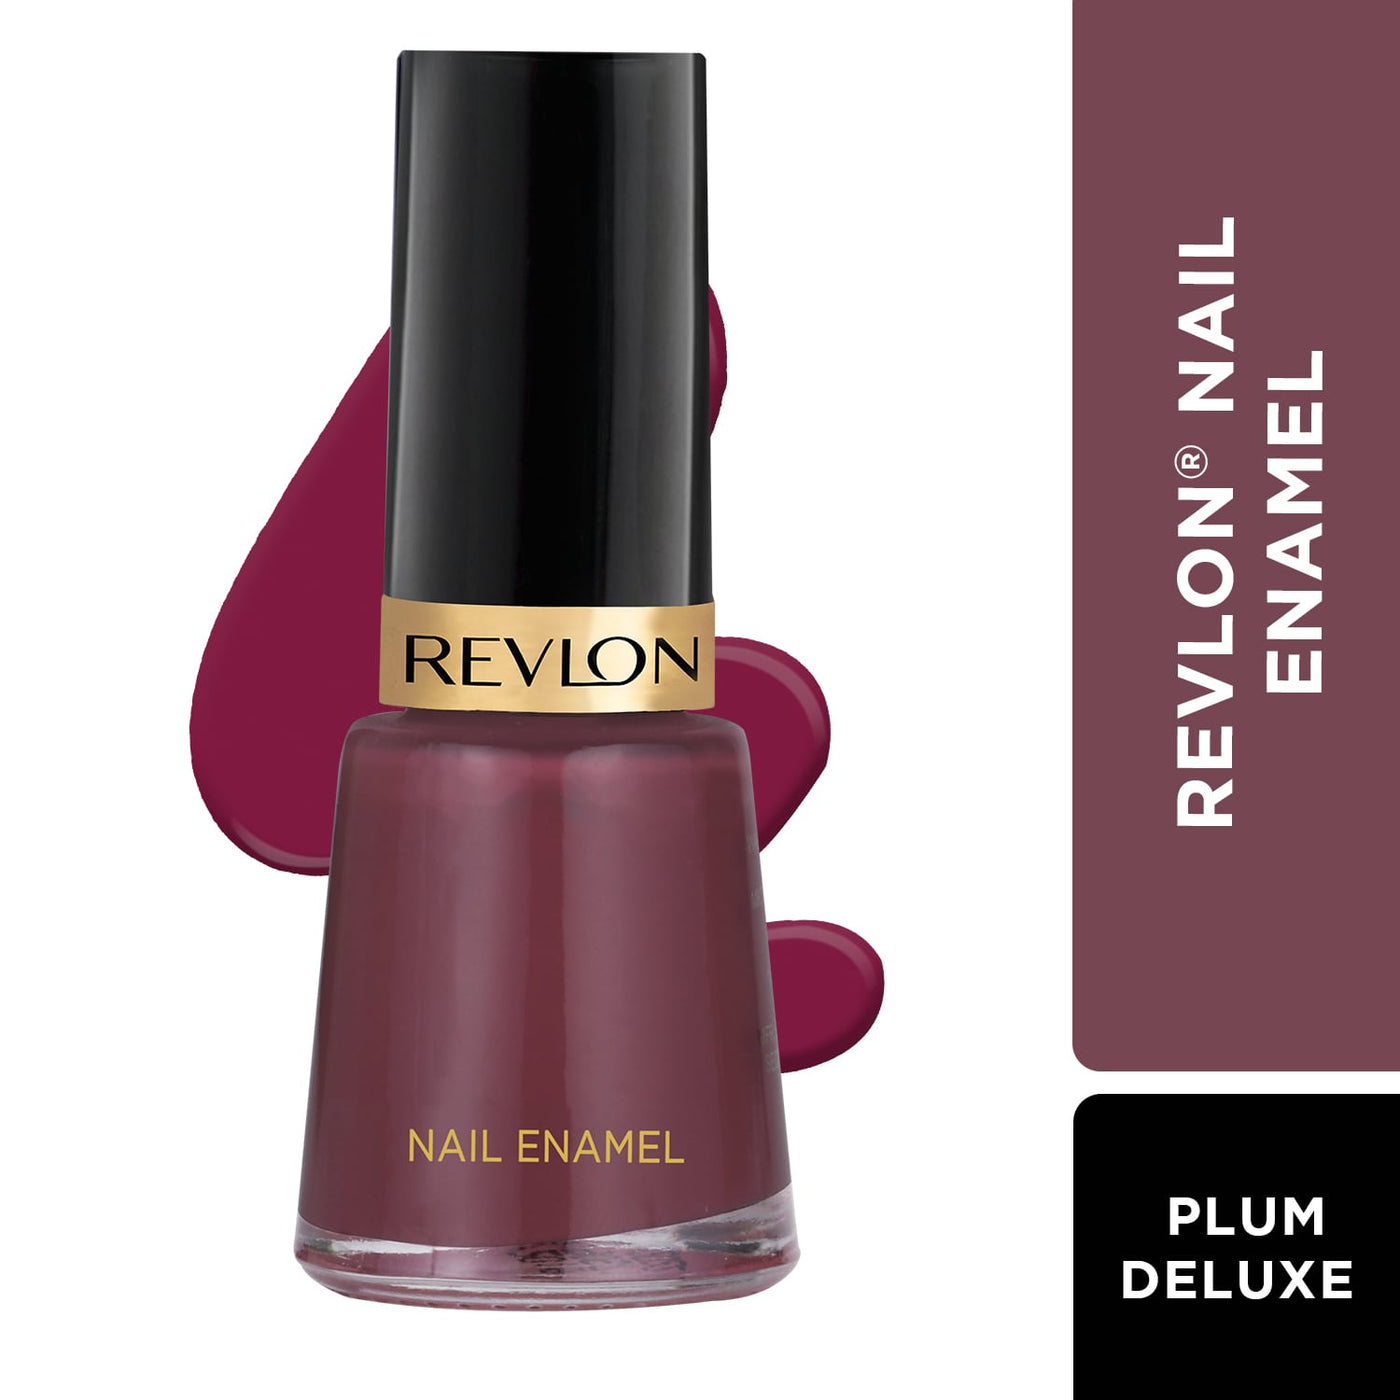 Revlon Nail Enamel in Cherry Berry and Iced Mauve